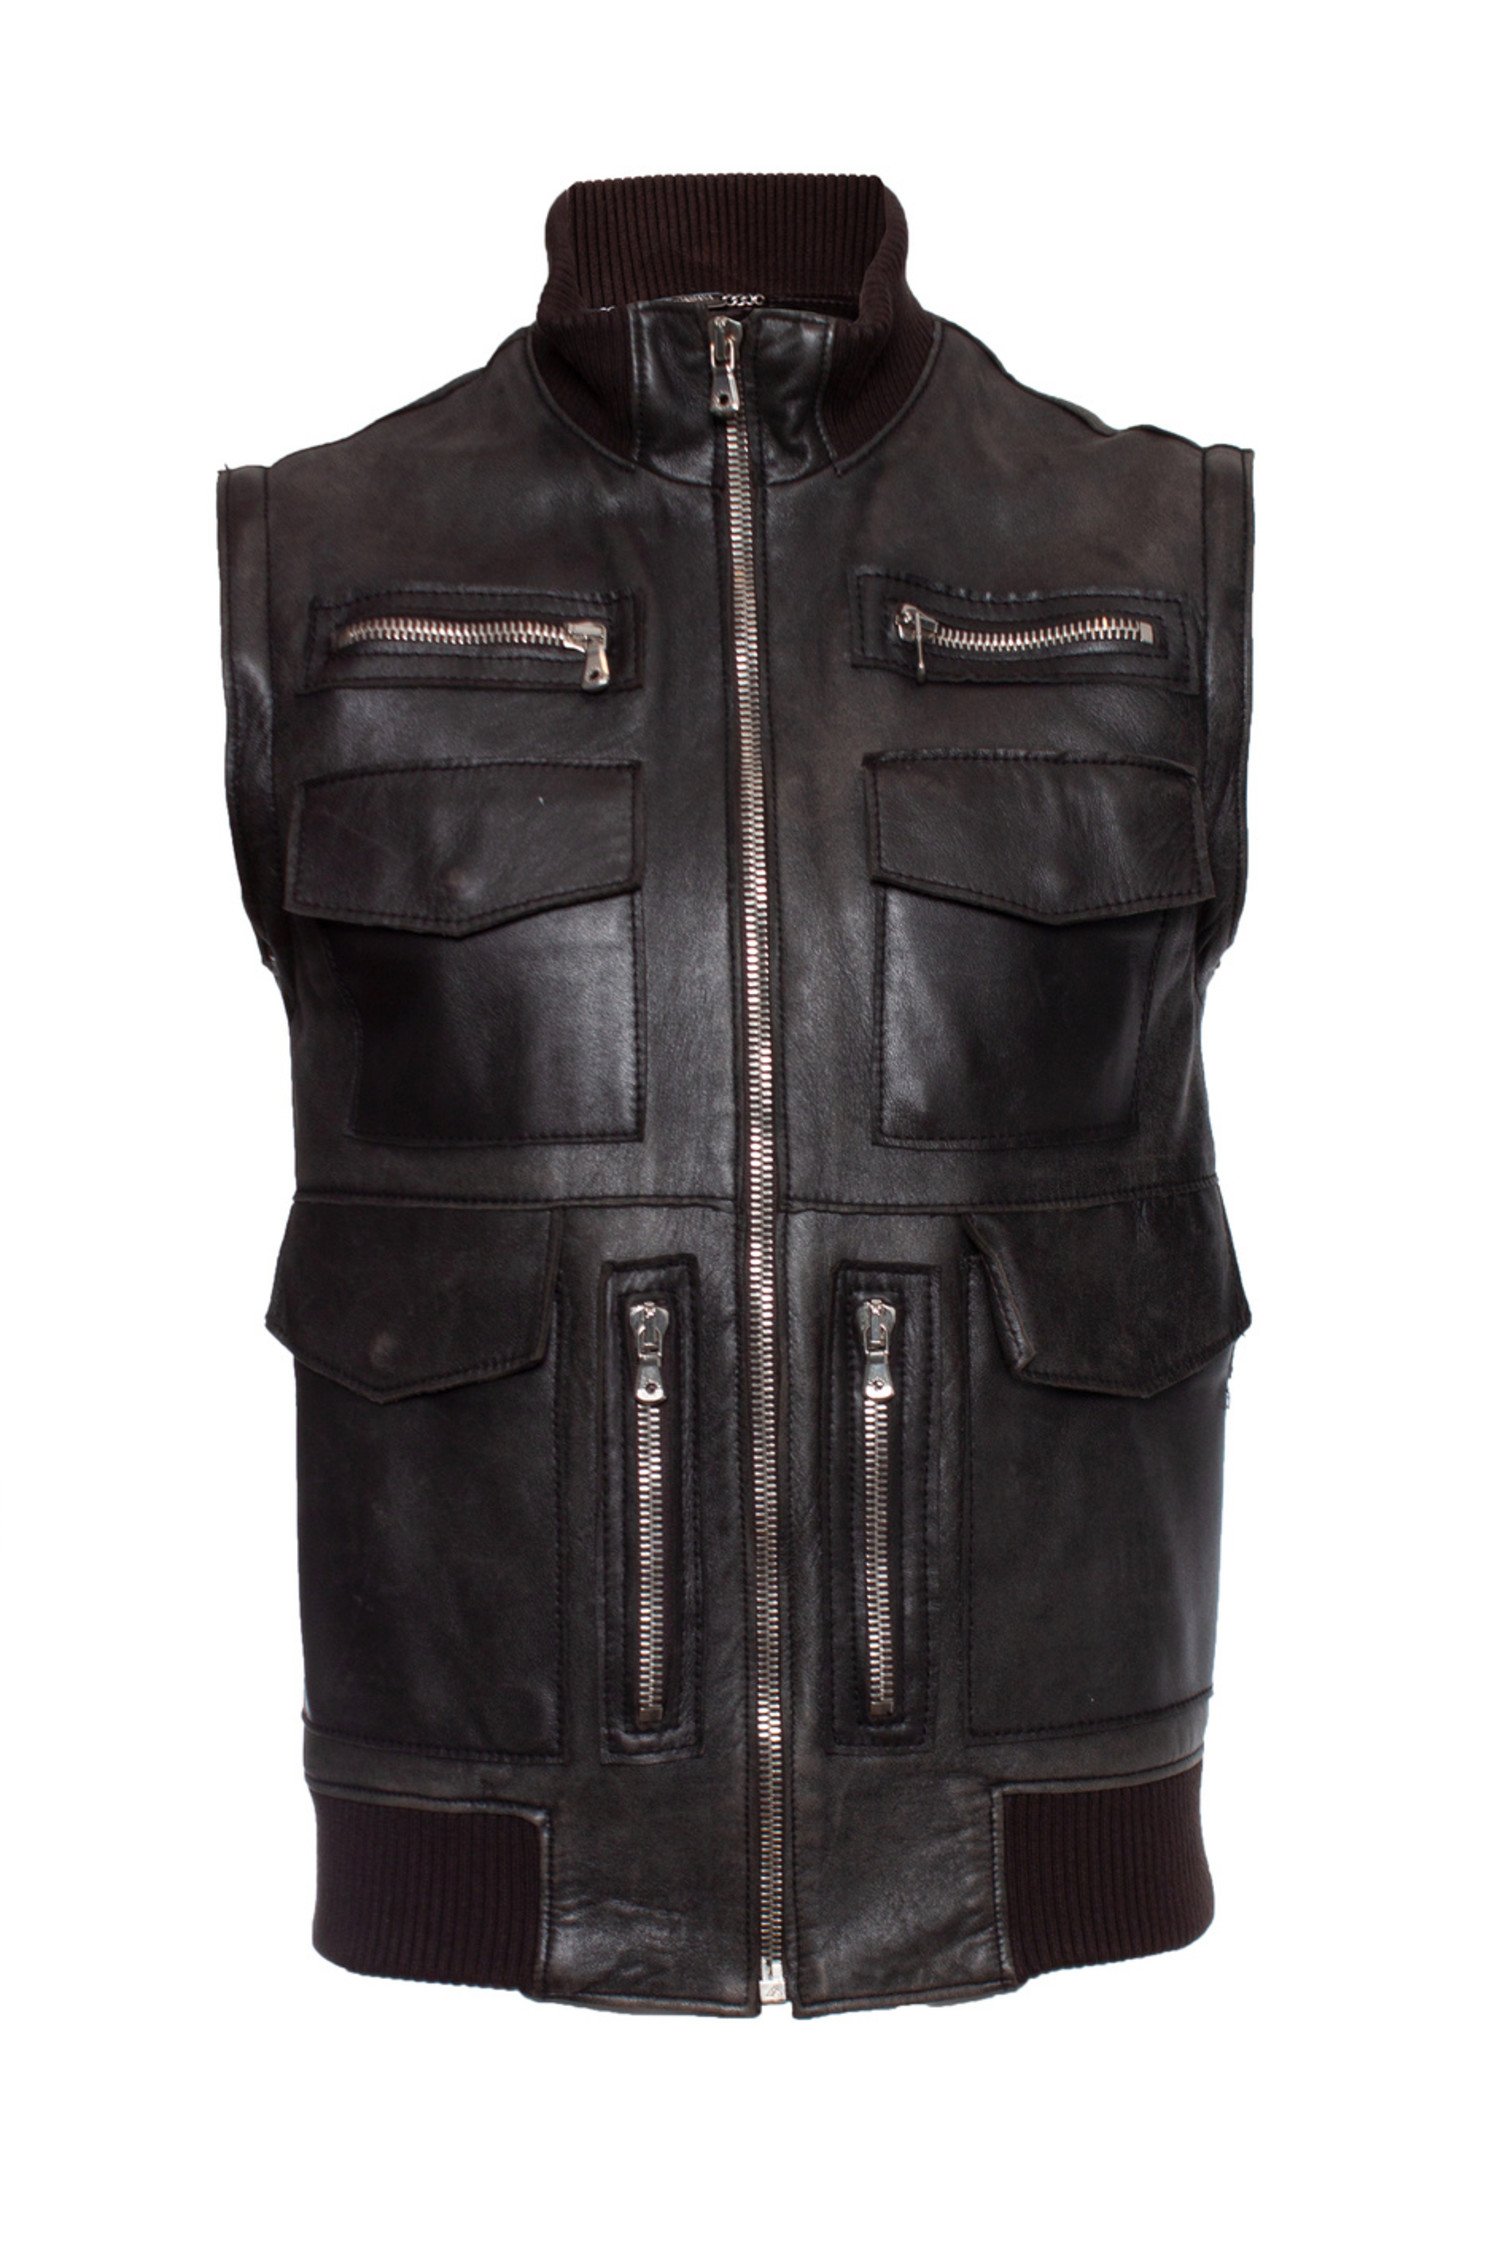 Dolce & Gabbana, Brown leather jacket with detachable sleeves. - Unique  Designer Pieces